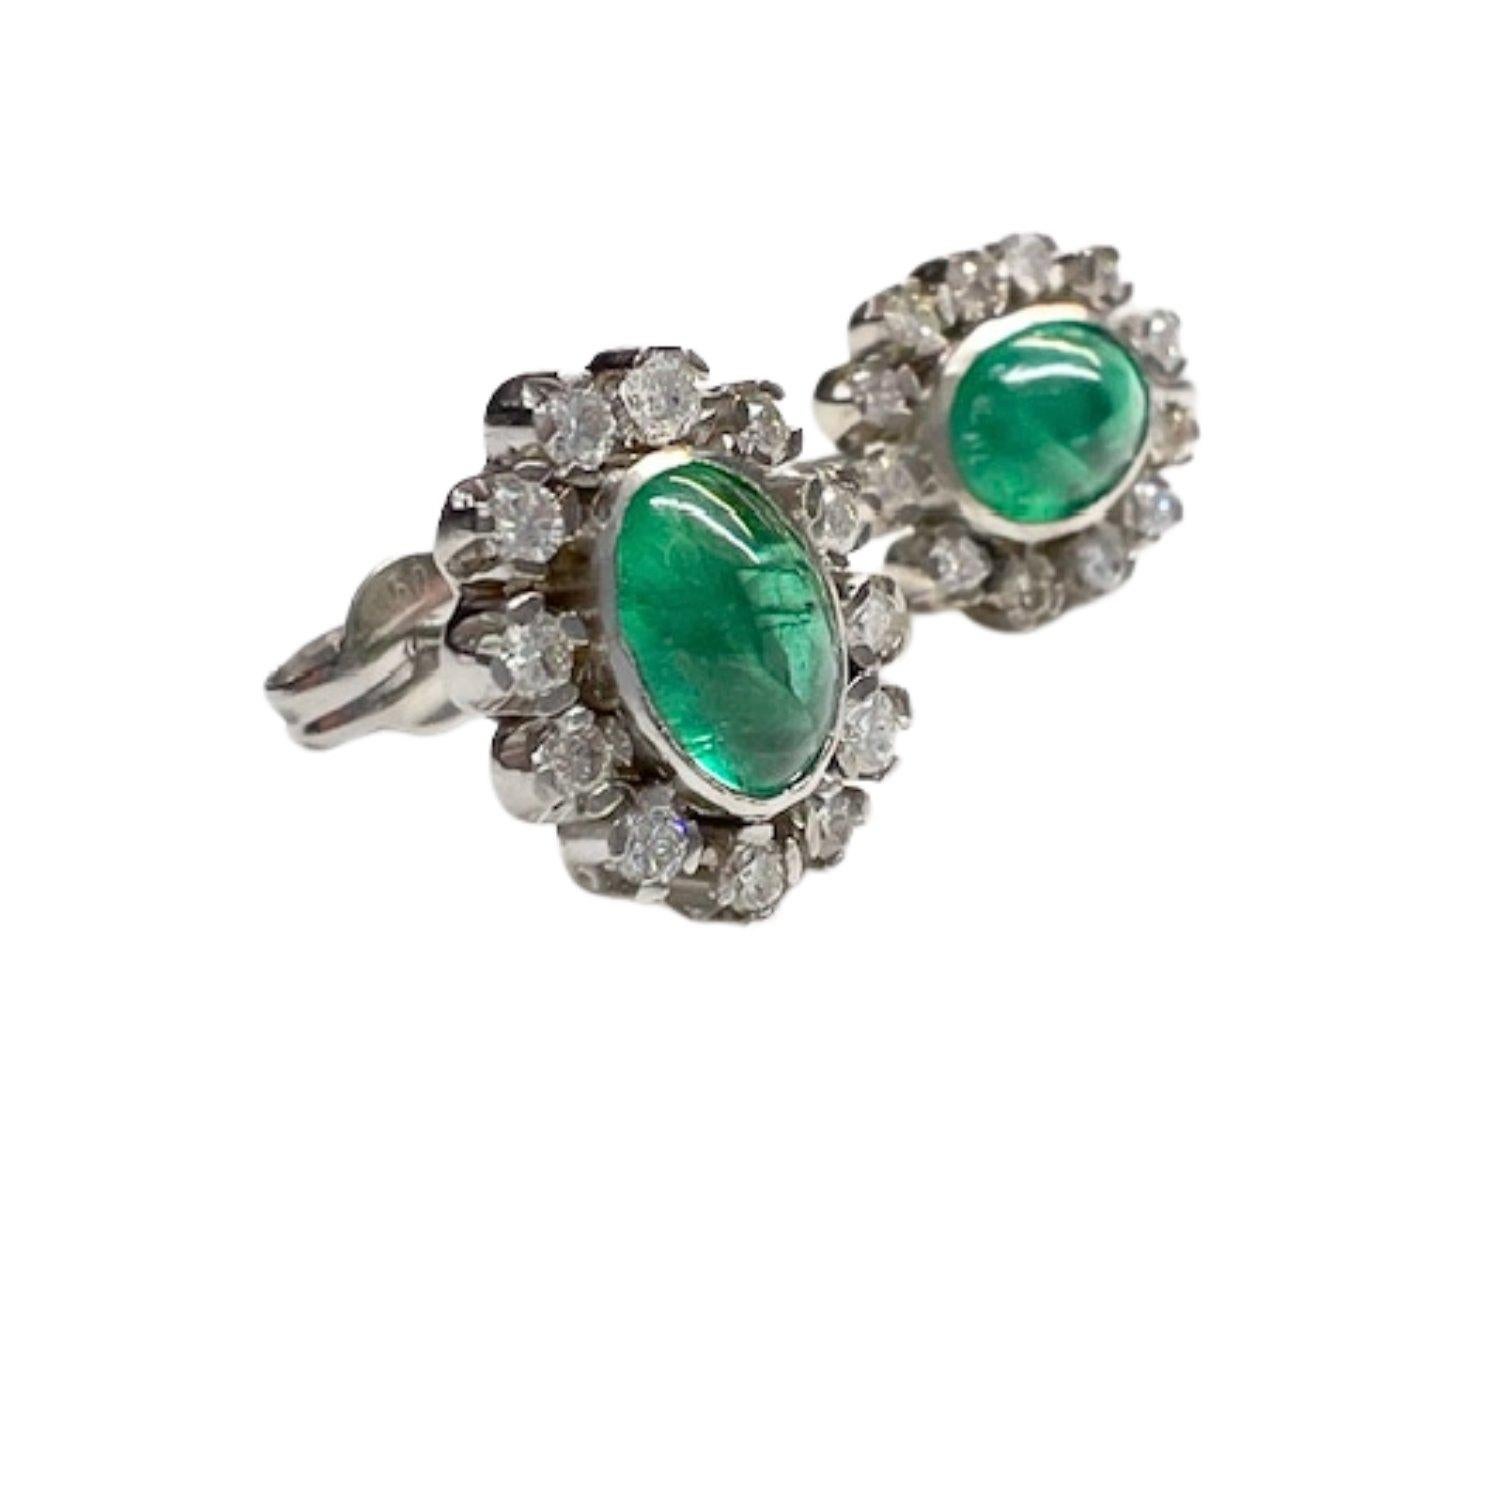 Experience the allure of Art Deco elegance with these platinum 950 karat rosette earrings, embellished with diamonds and a Colombian emerald. Weighing 3.08 grams and measuring 1.2 cm in length and 1 cm in width, these earrings exude sophistication